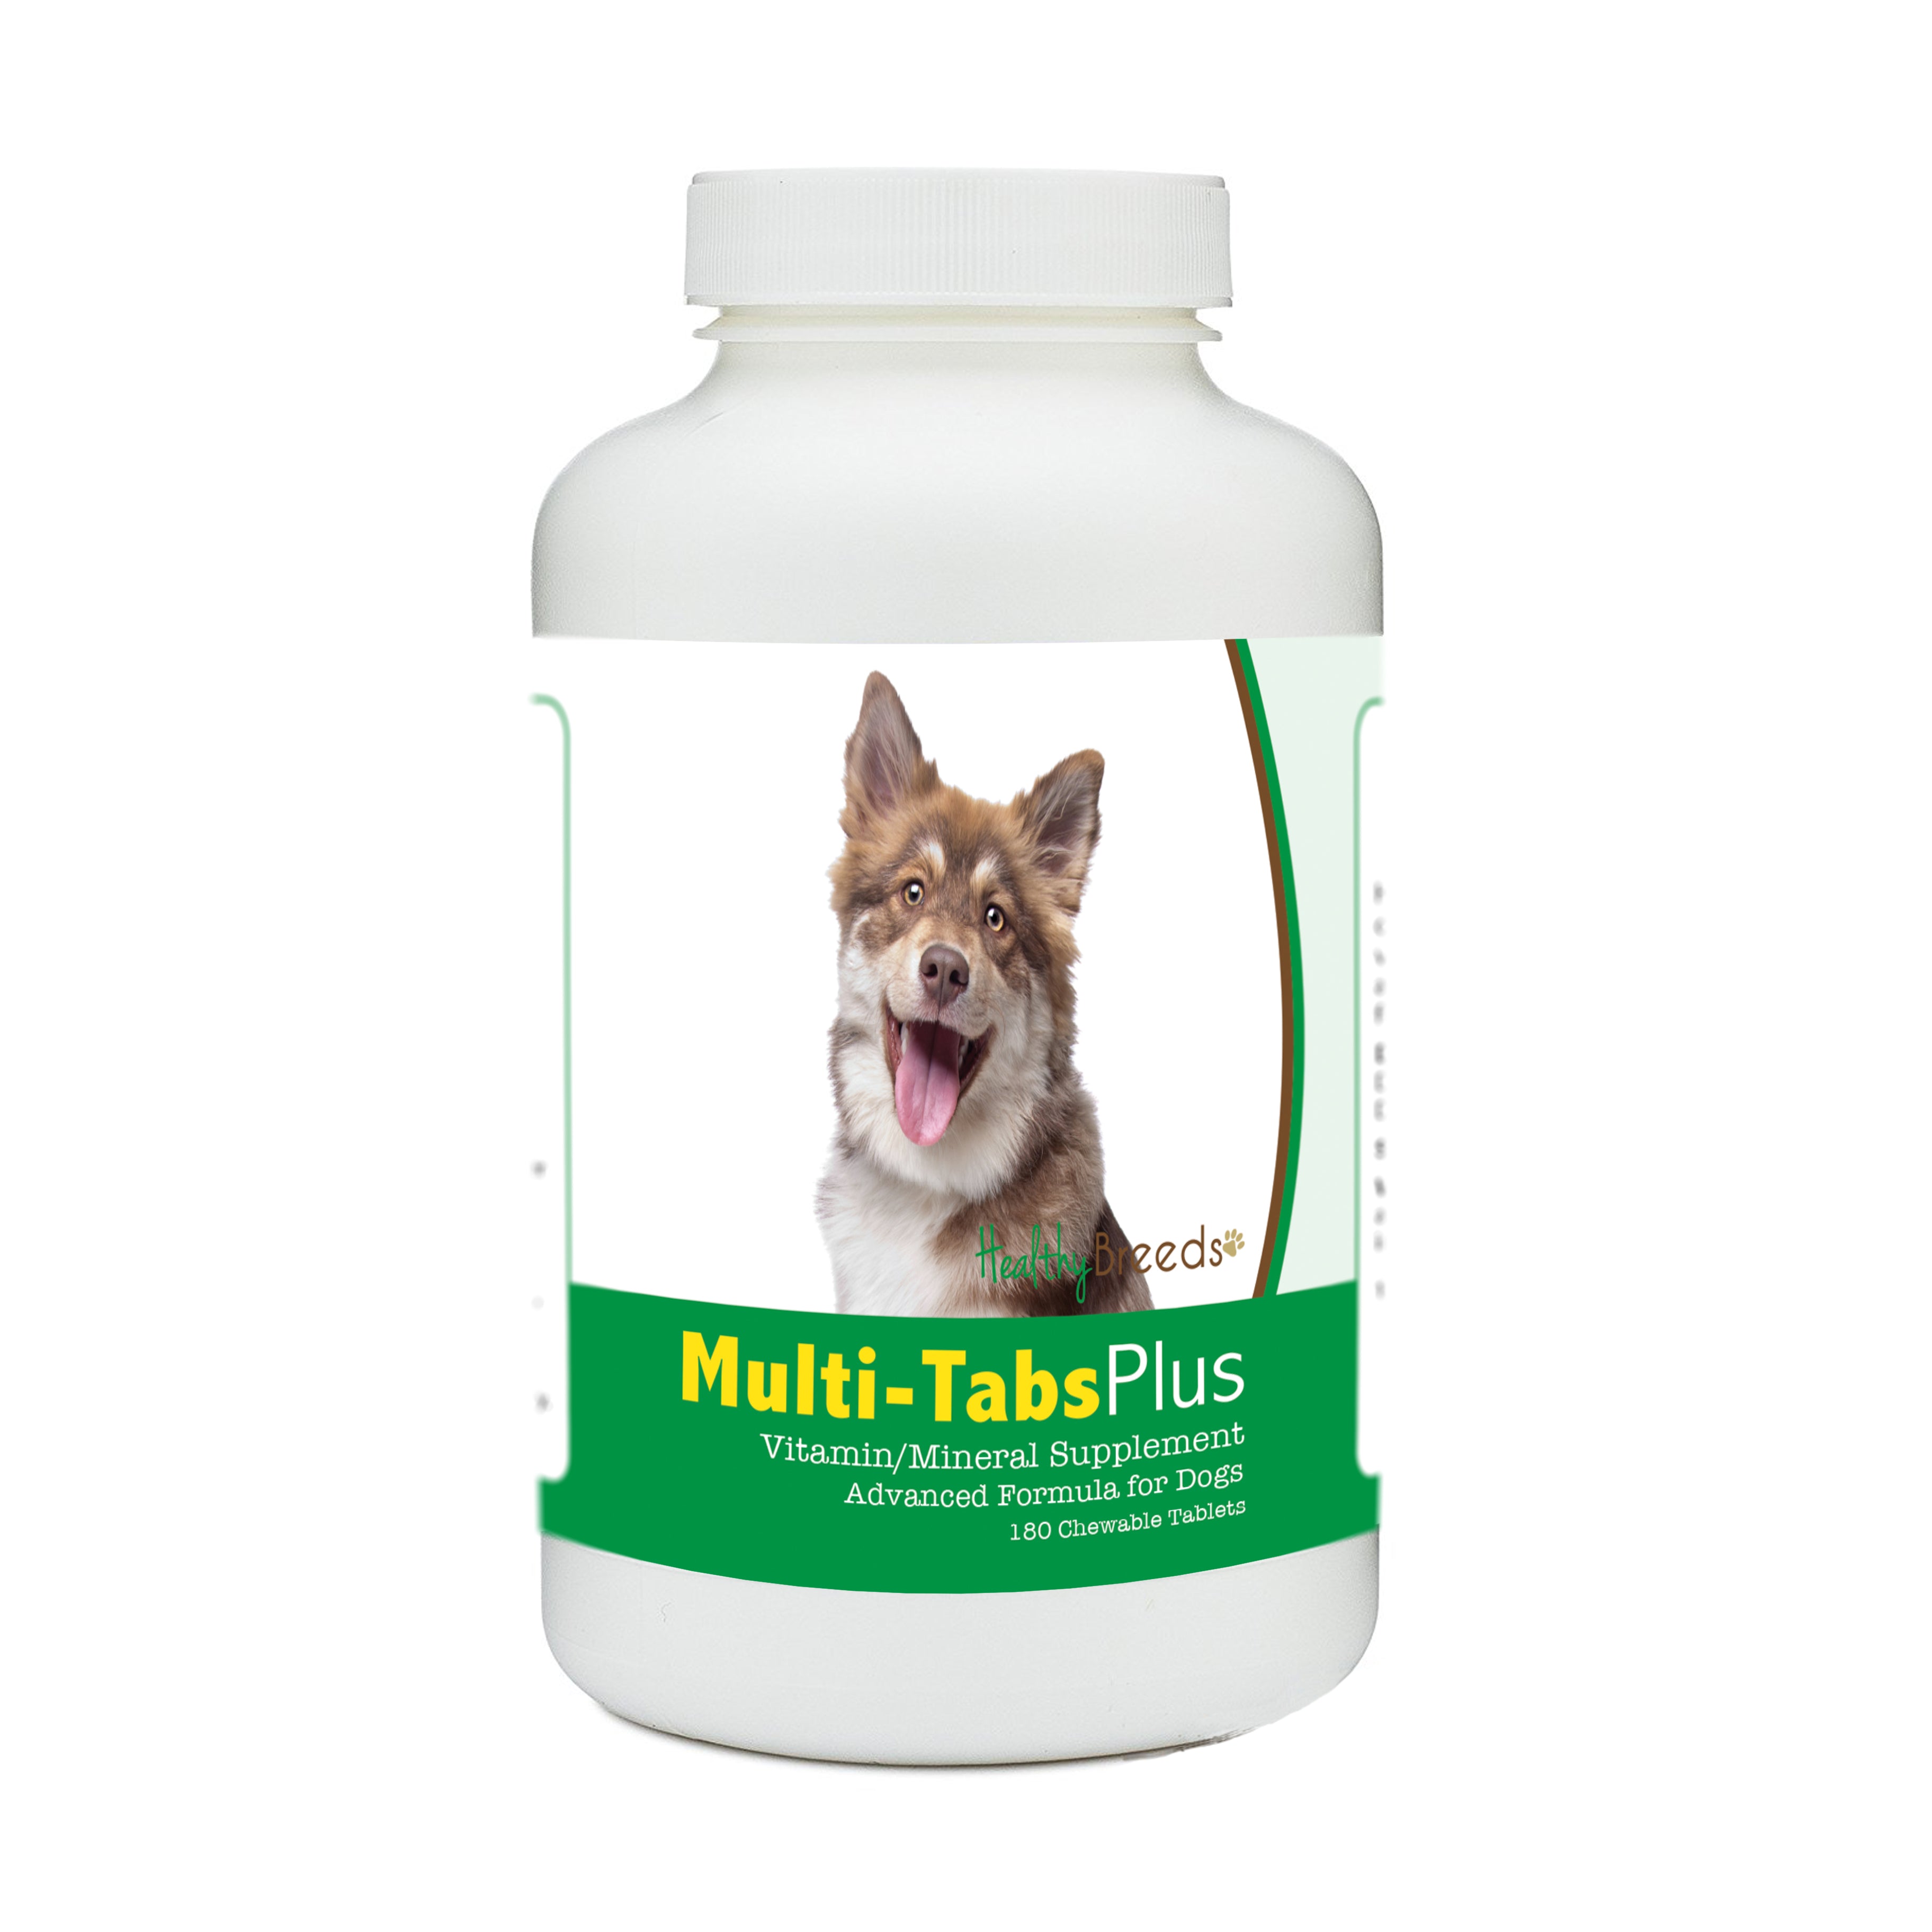 Finnish Lapphund Multi-Tabs Plus Chewable Tablets 180 Count